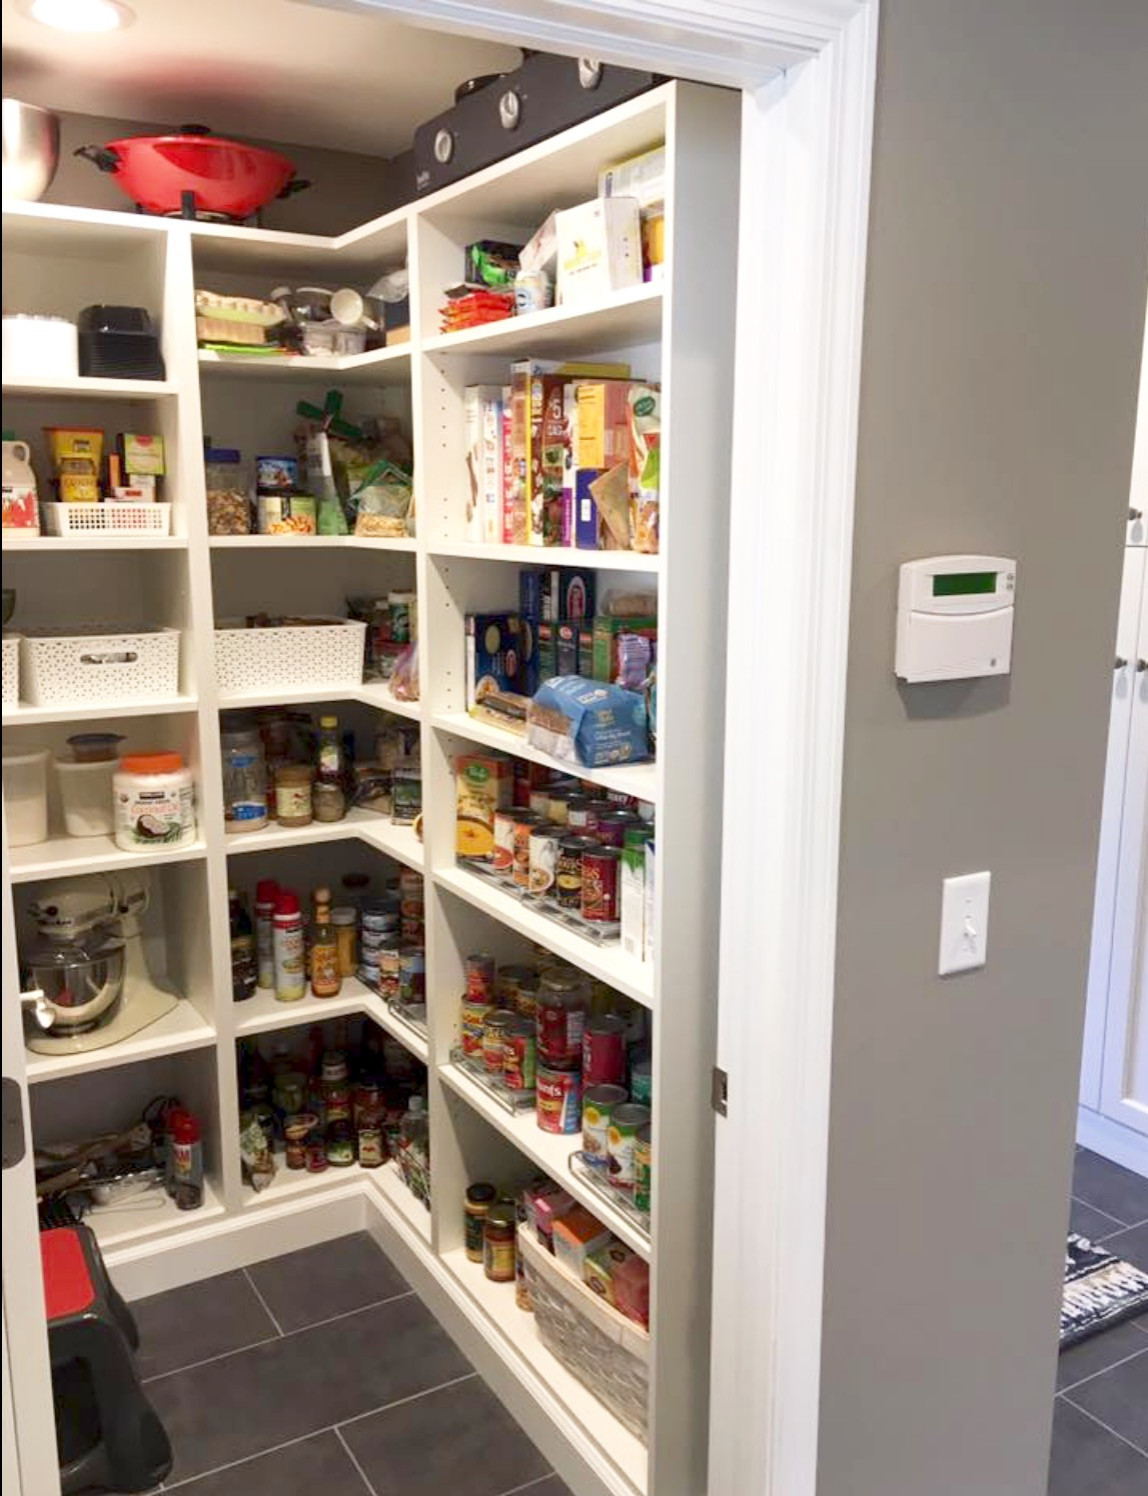 North Oaks - Pantry addition